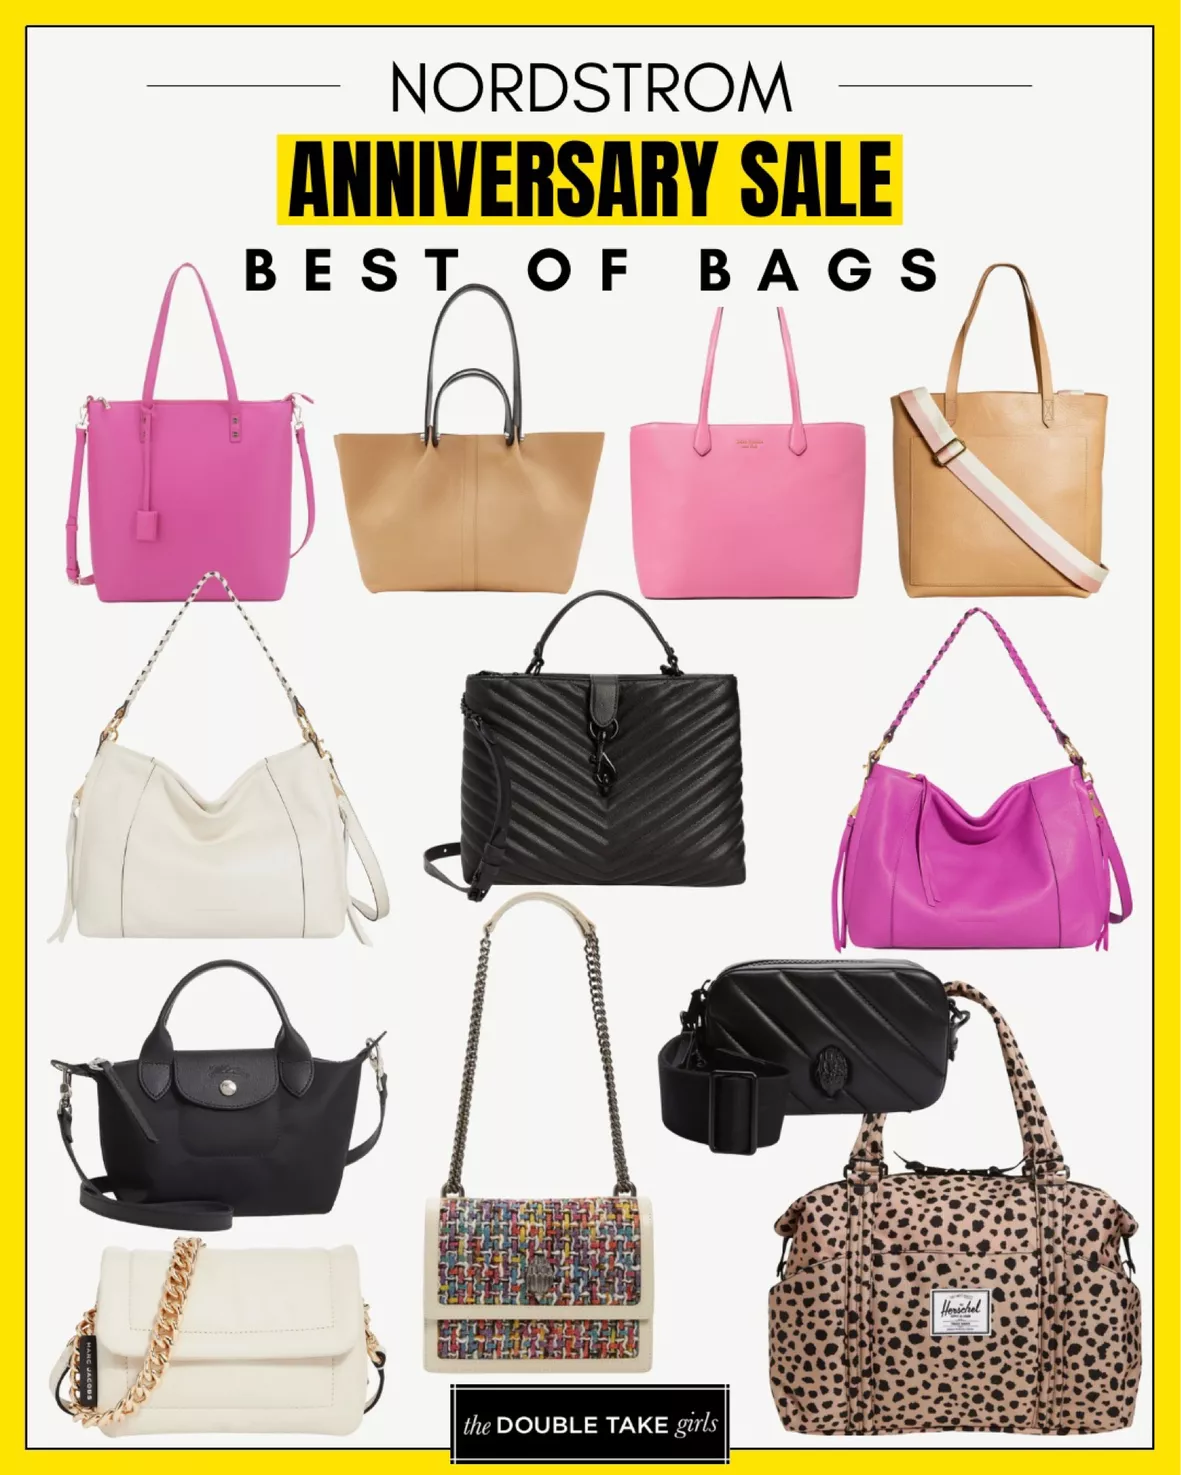 Join The Bag Sale - Big discounts & free delivery. Buy now